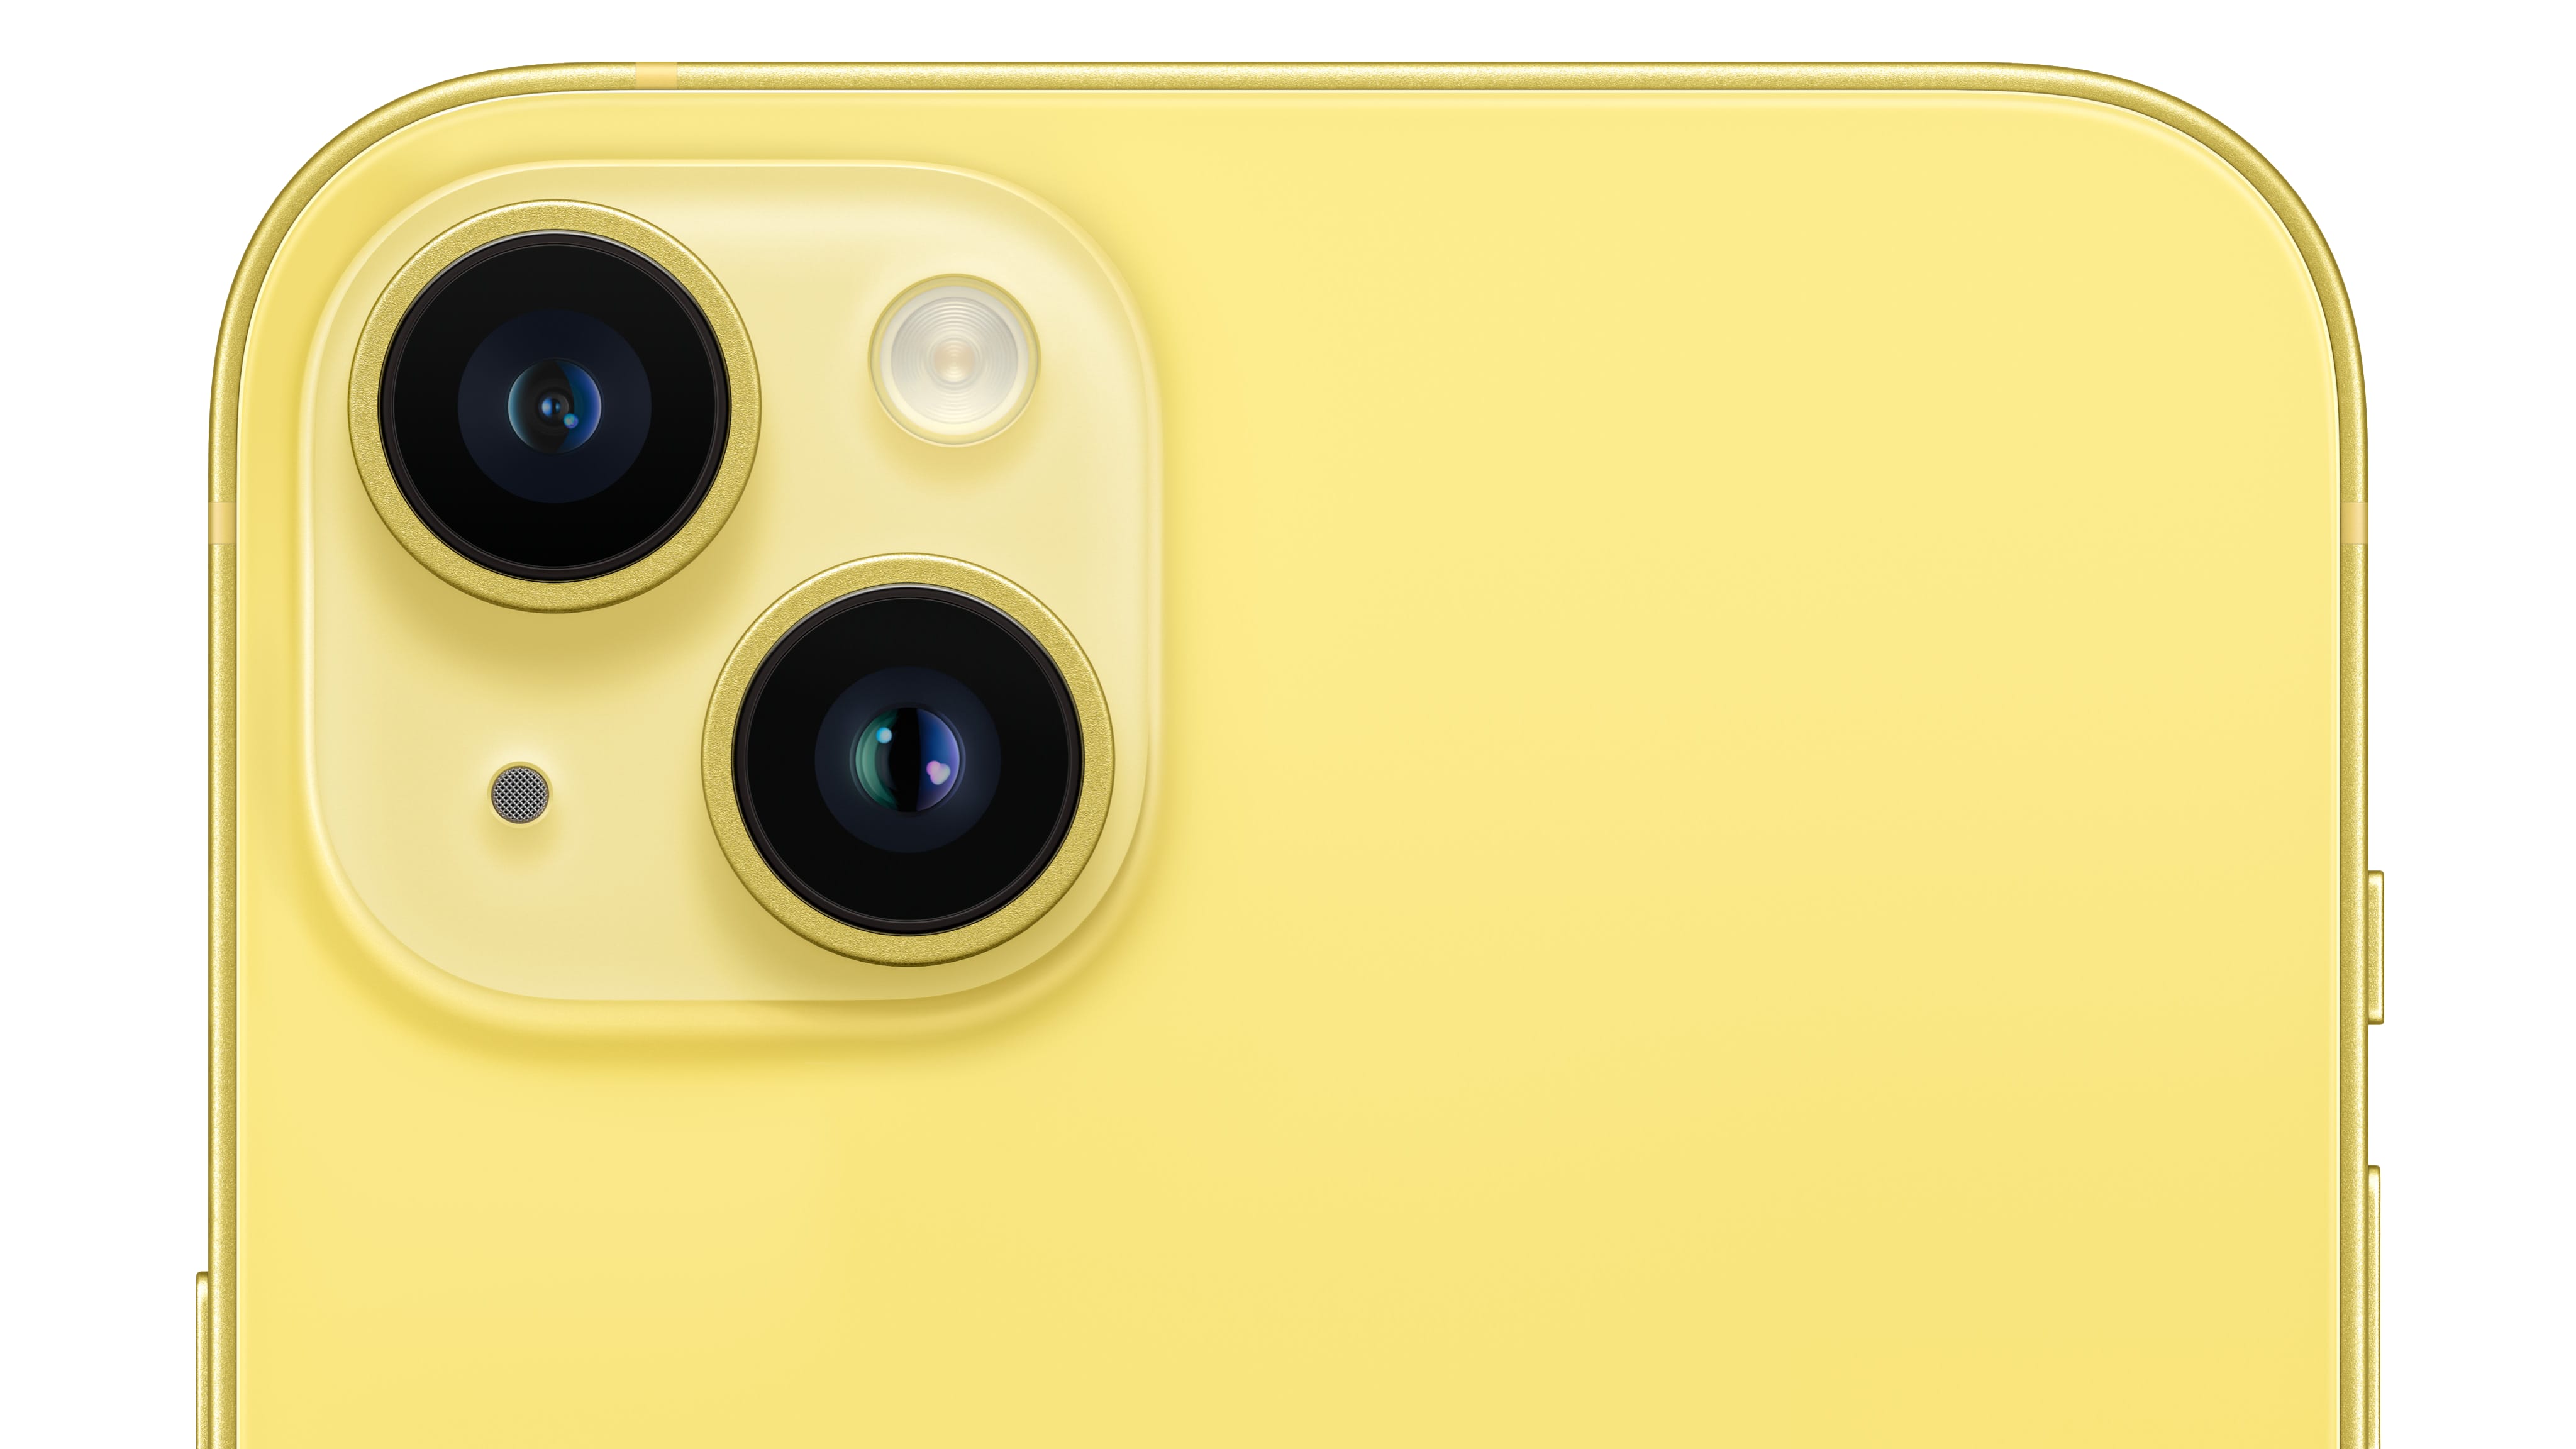 The dual rear cameras on a yellow iPhone 14 Plus